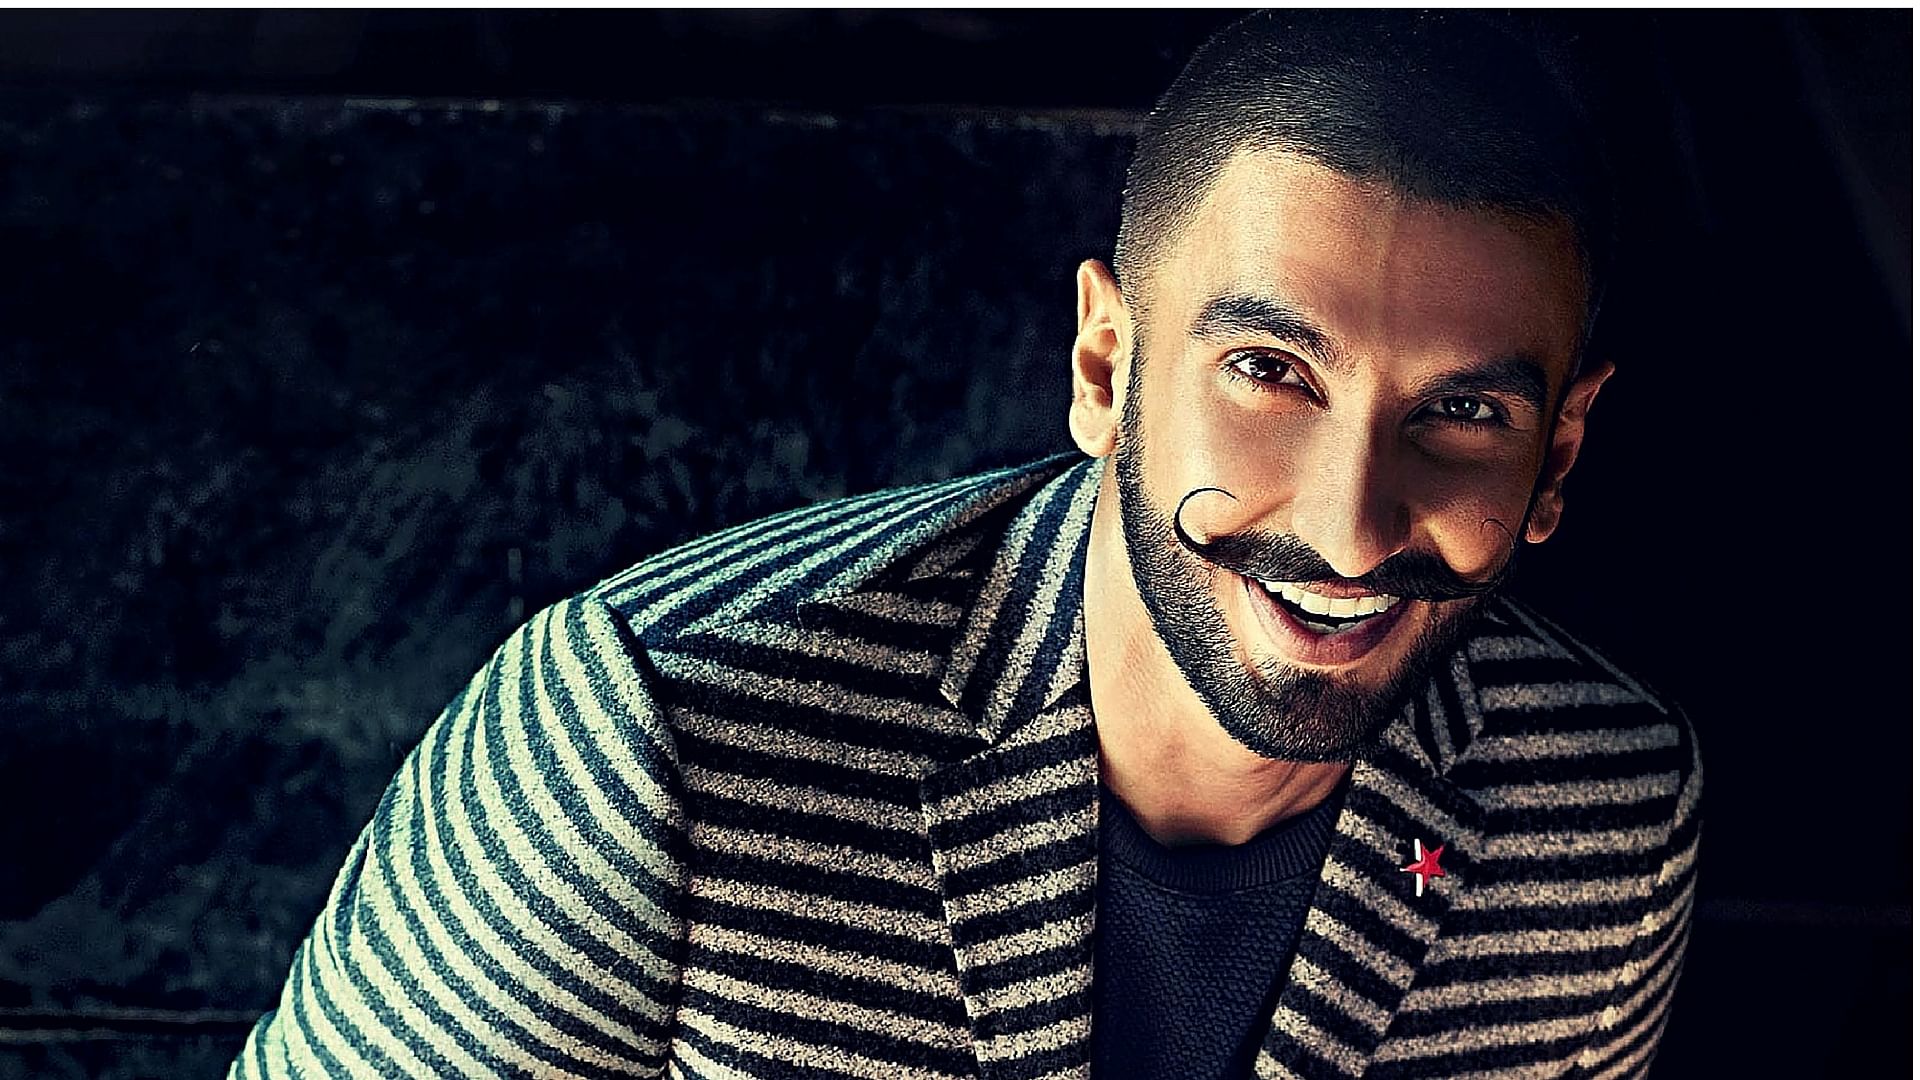 Happy Birthday Ranveer Singh What Do We Wish For Him This Year   dontcallitbollywood